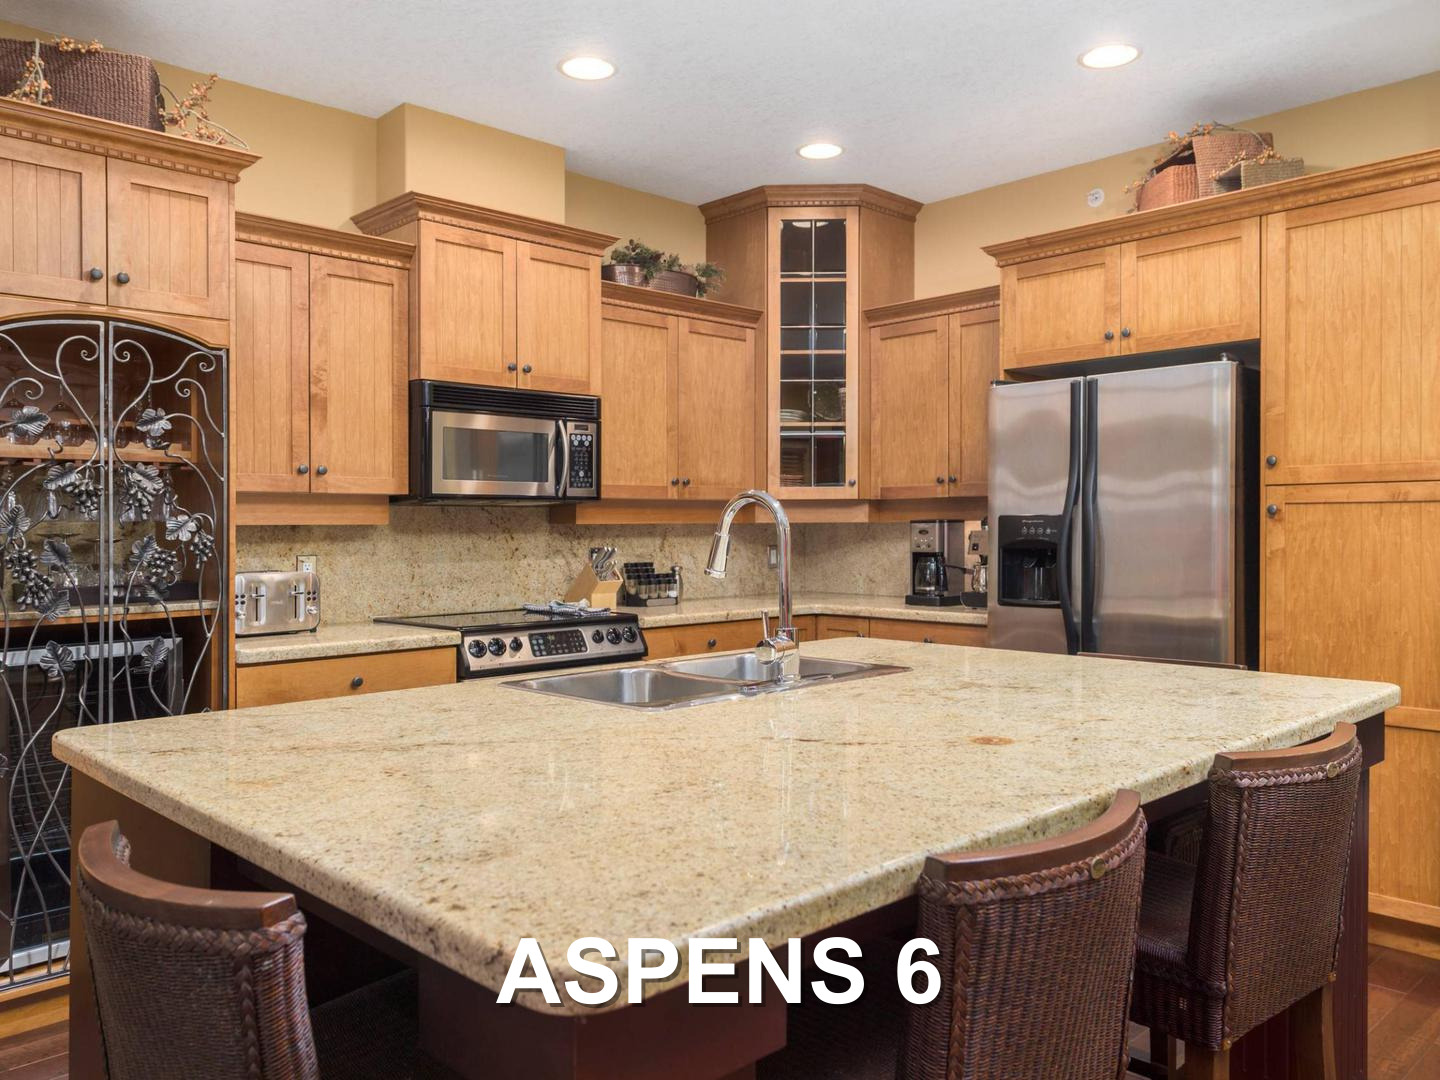 The Aspens 6 luxury, gourmet kitchen, with a stainless steel fridge and oven, a microwave, and a large granite topped kitchen island, with warm wooden cabinets, located at Big White Ski Resort and managed by Luxury Mountain Vacation Rentals.